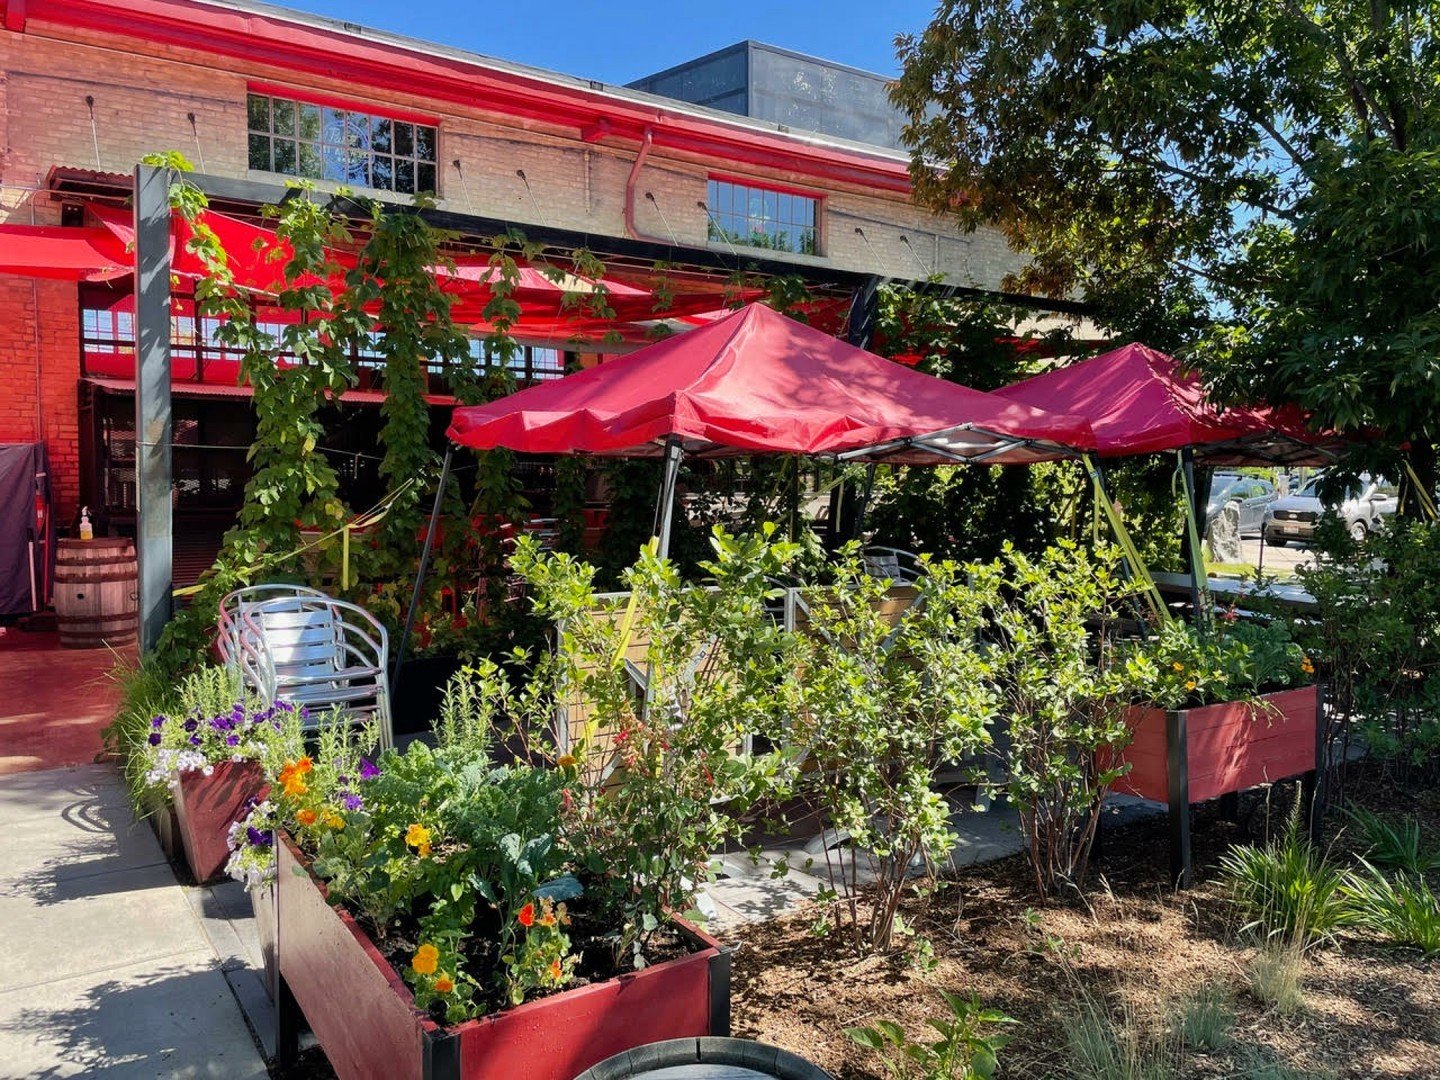 We've got lots coming up when that warm weather hits!

If Montana cooperates, our patio will be ready for seating on the 10TH, and our summer menu is launching on the 14th! 

So excited to share it with you, Bozeman. 

#montanafood #bozemanfood #down